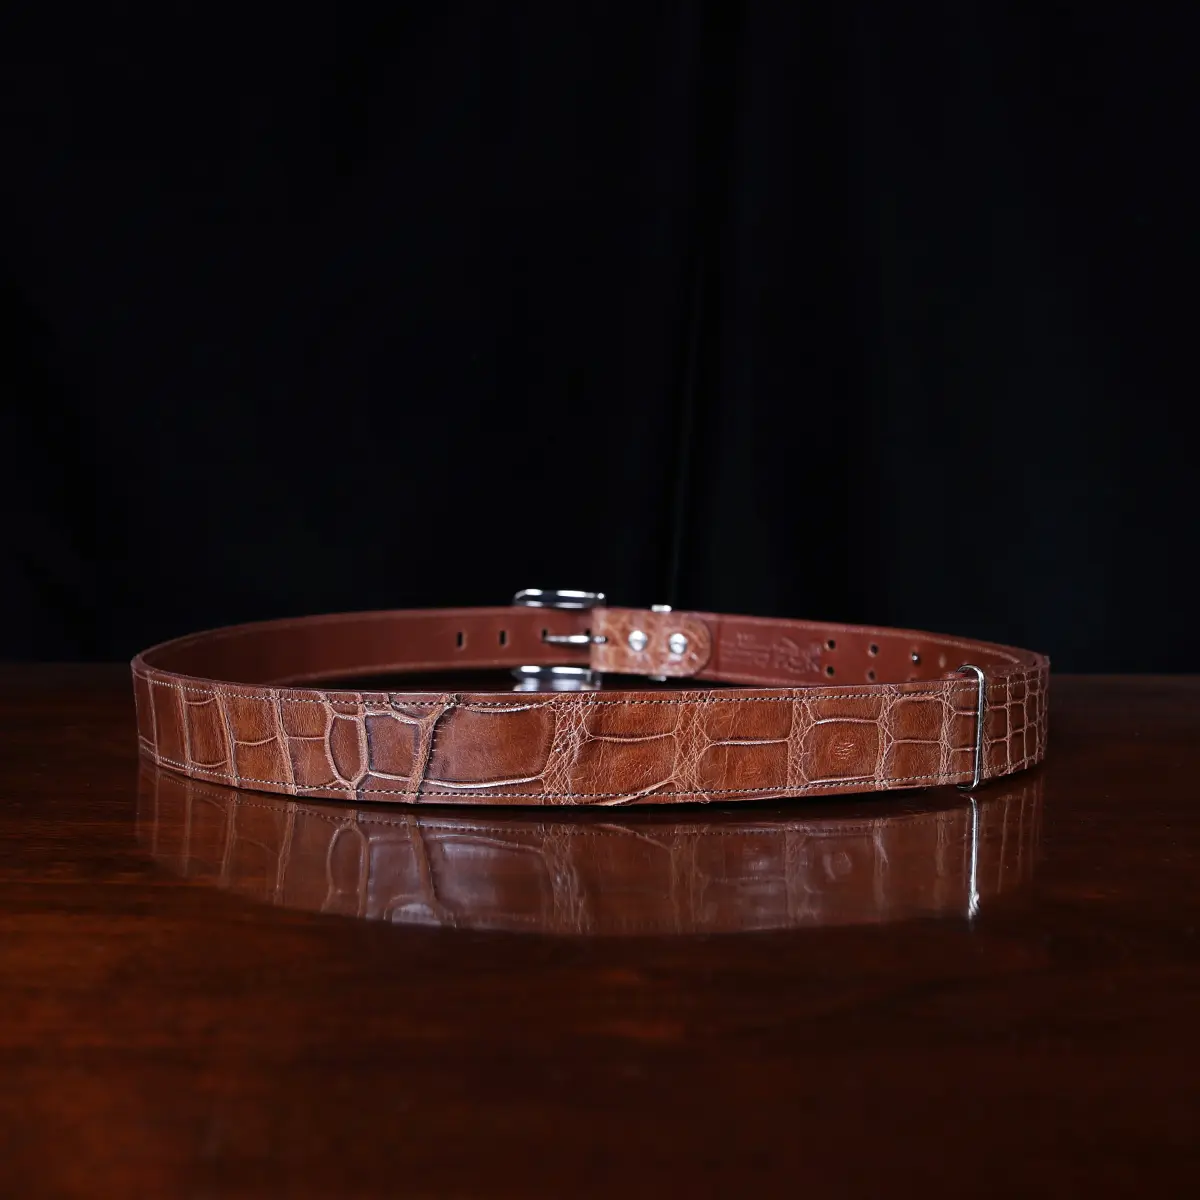 No. 4 Belt in American Alligator - X-Large - ID 001 - back view on a wooden table with black background